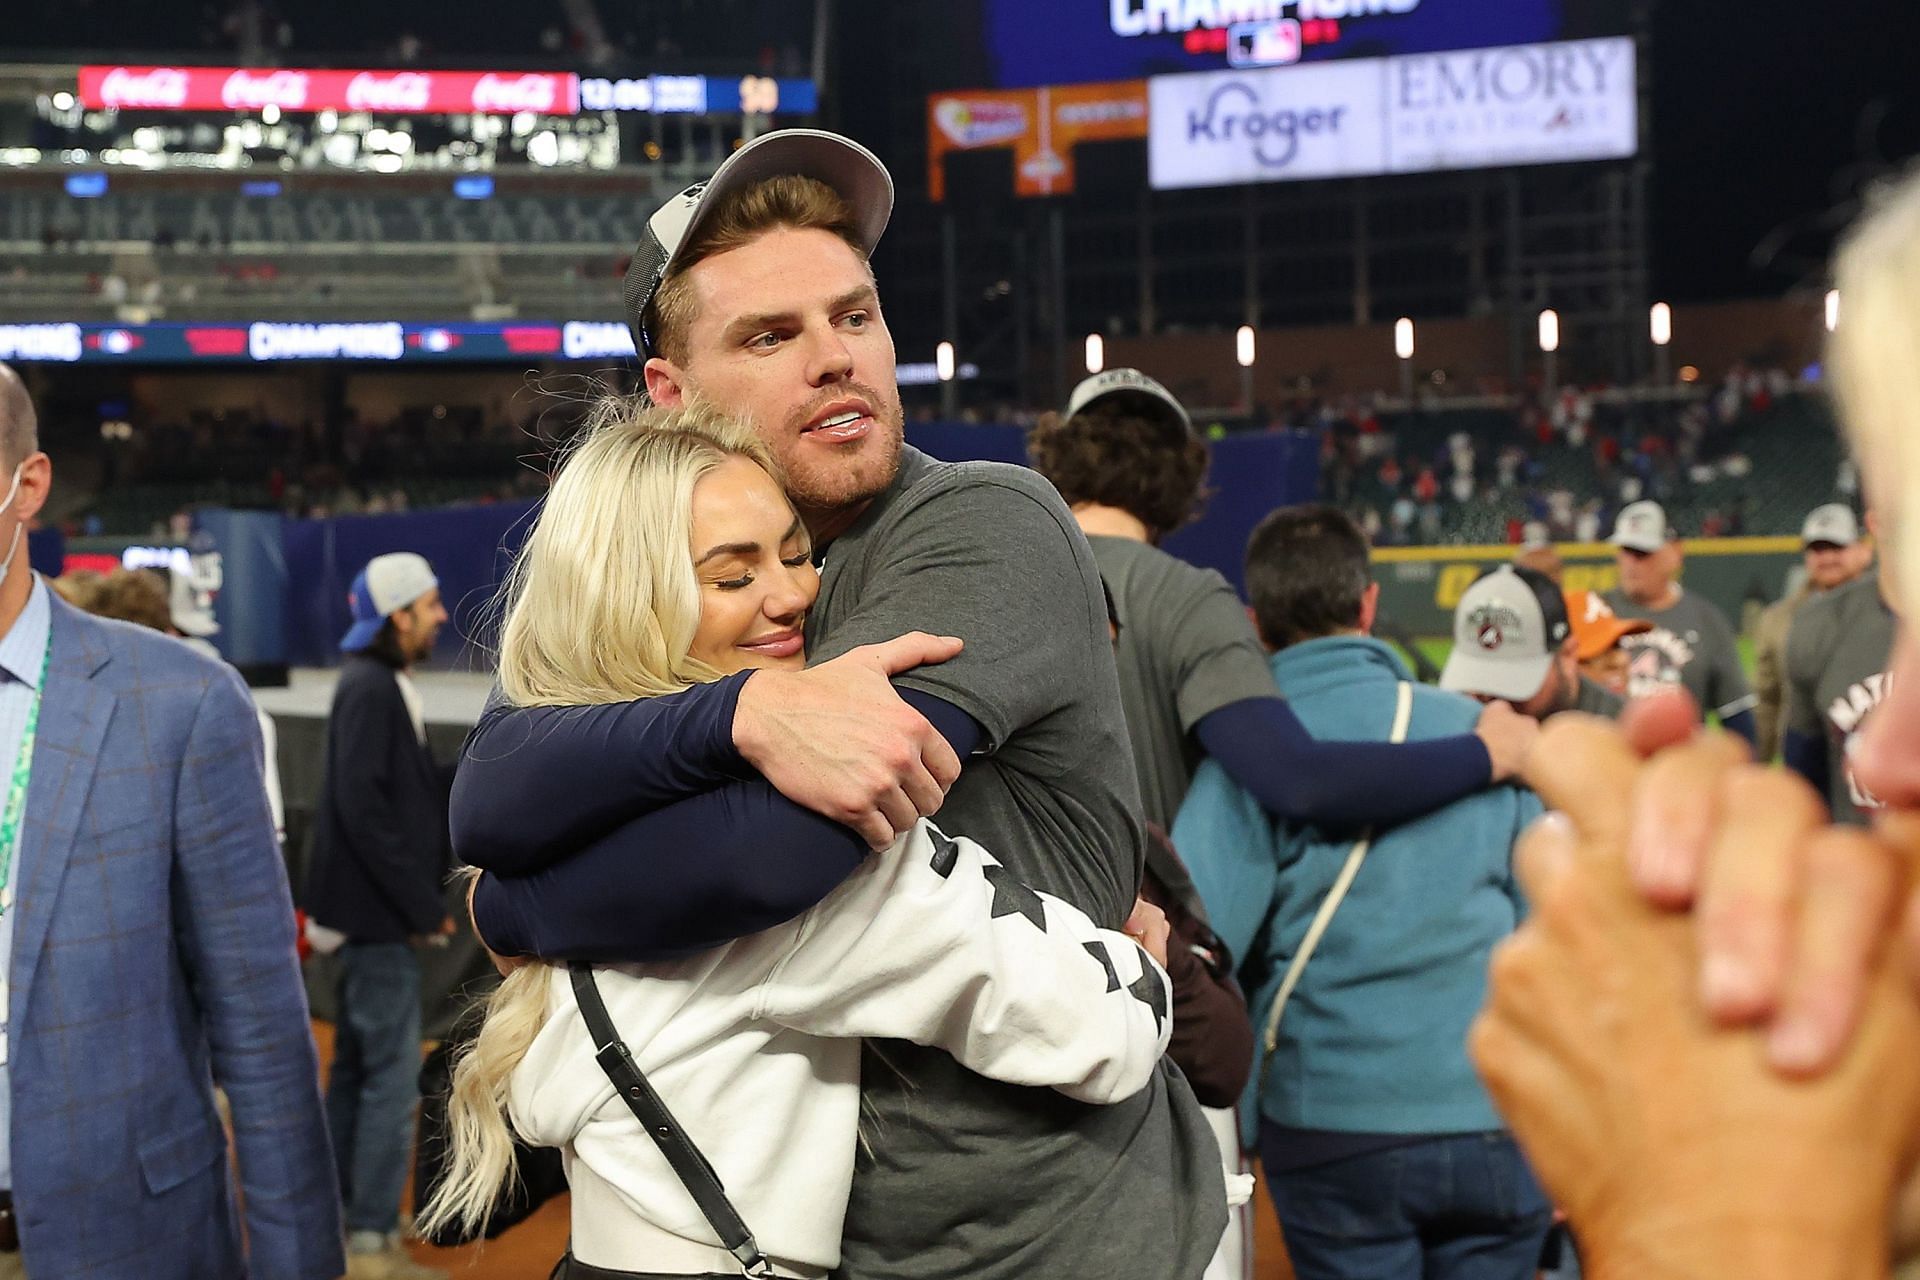 Freddie Freeman and Chelsea Freeman: The complete relationship timeline